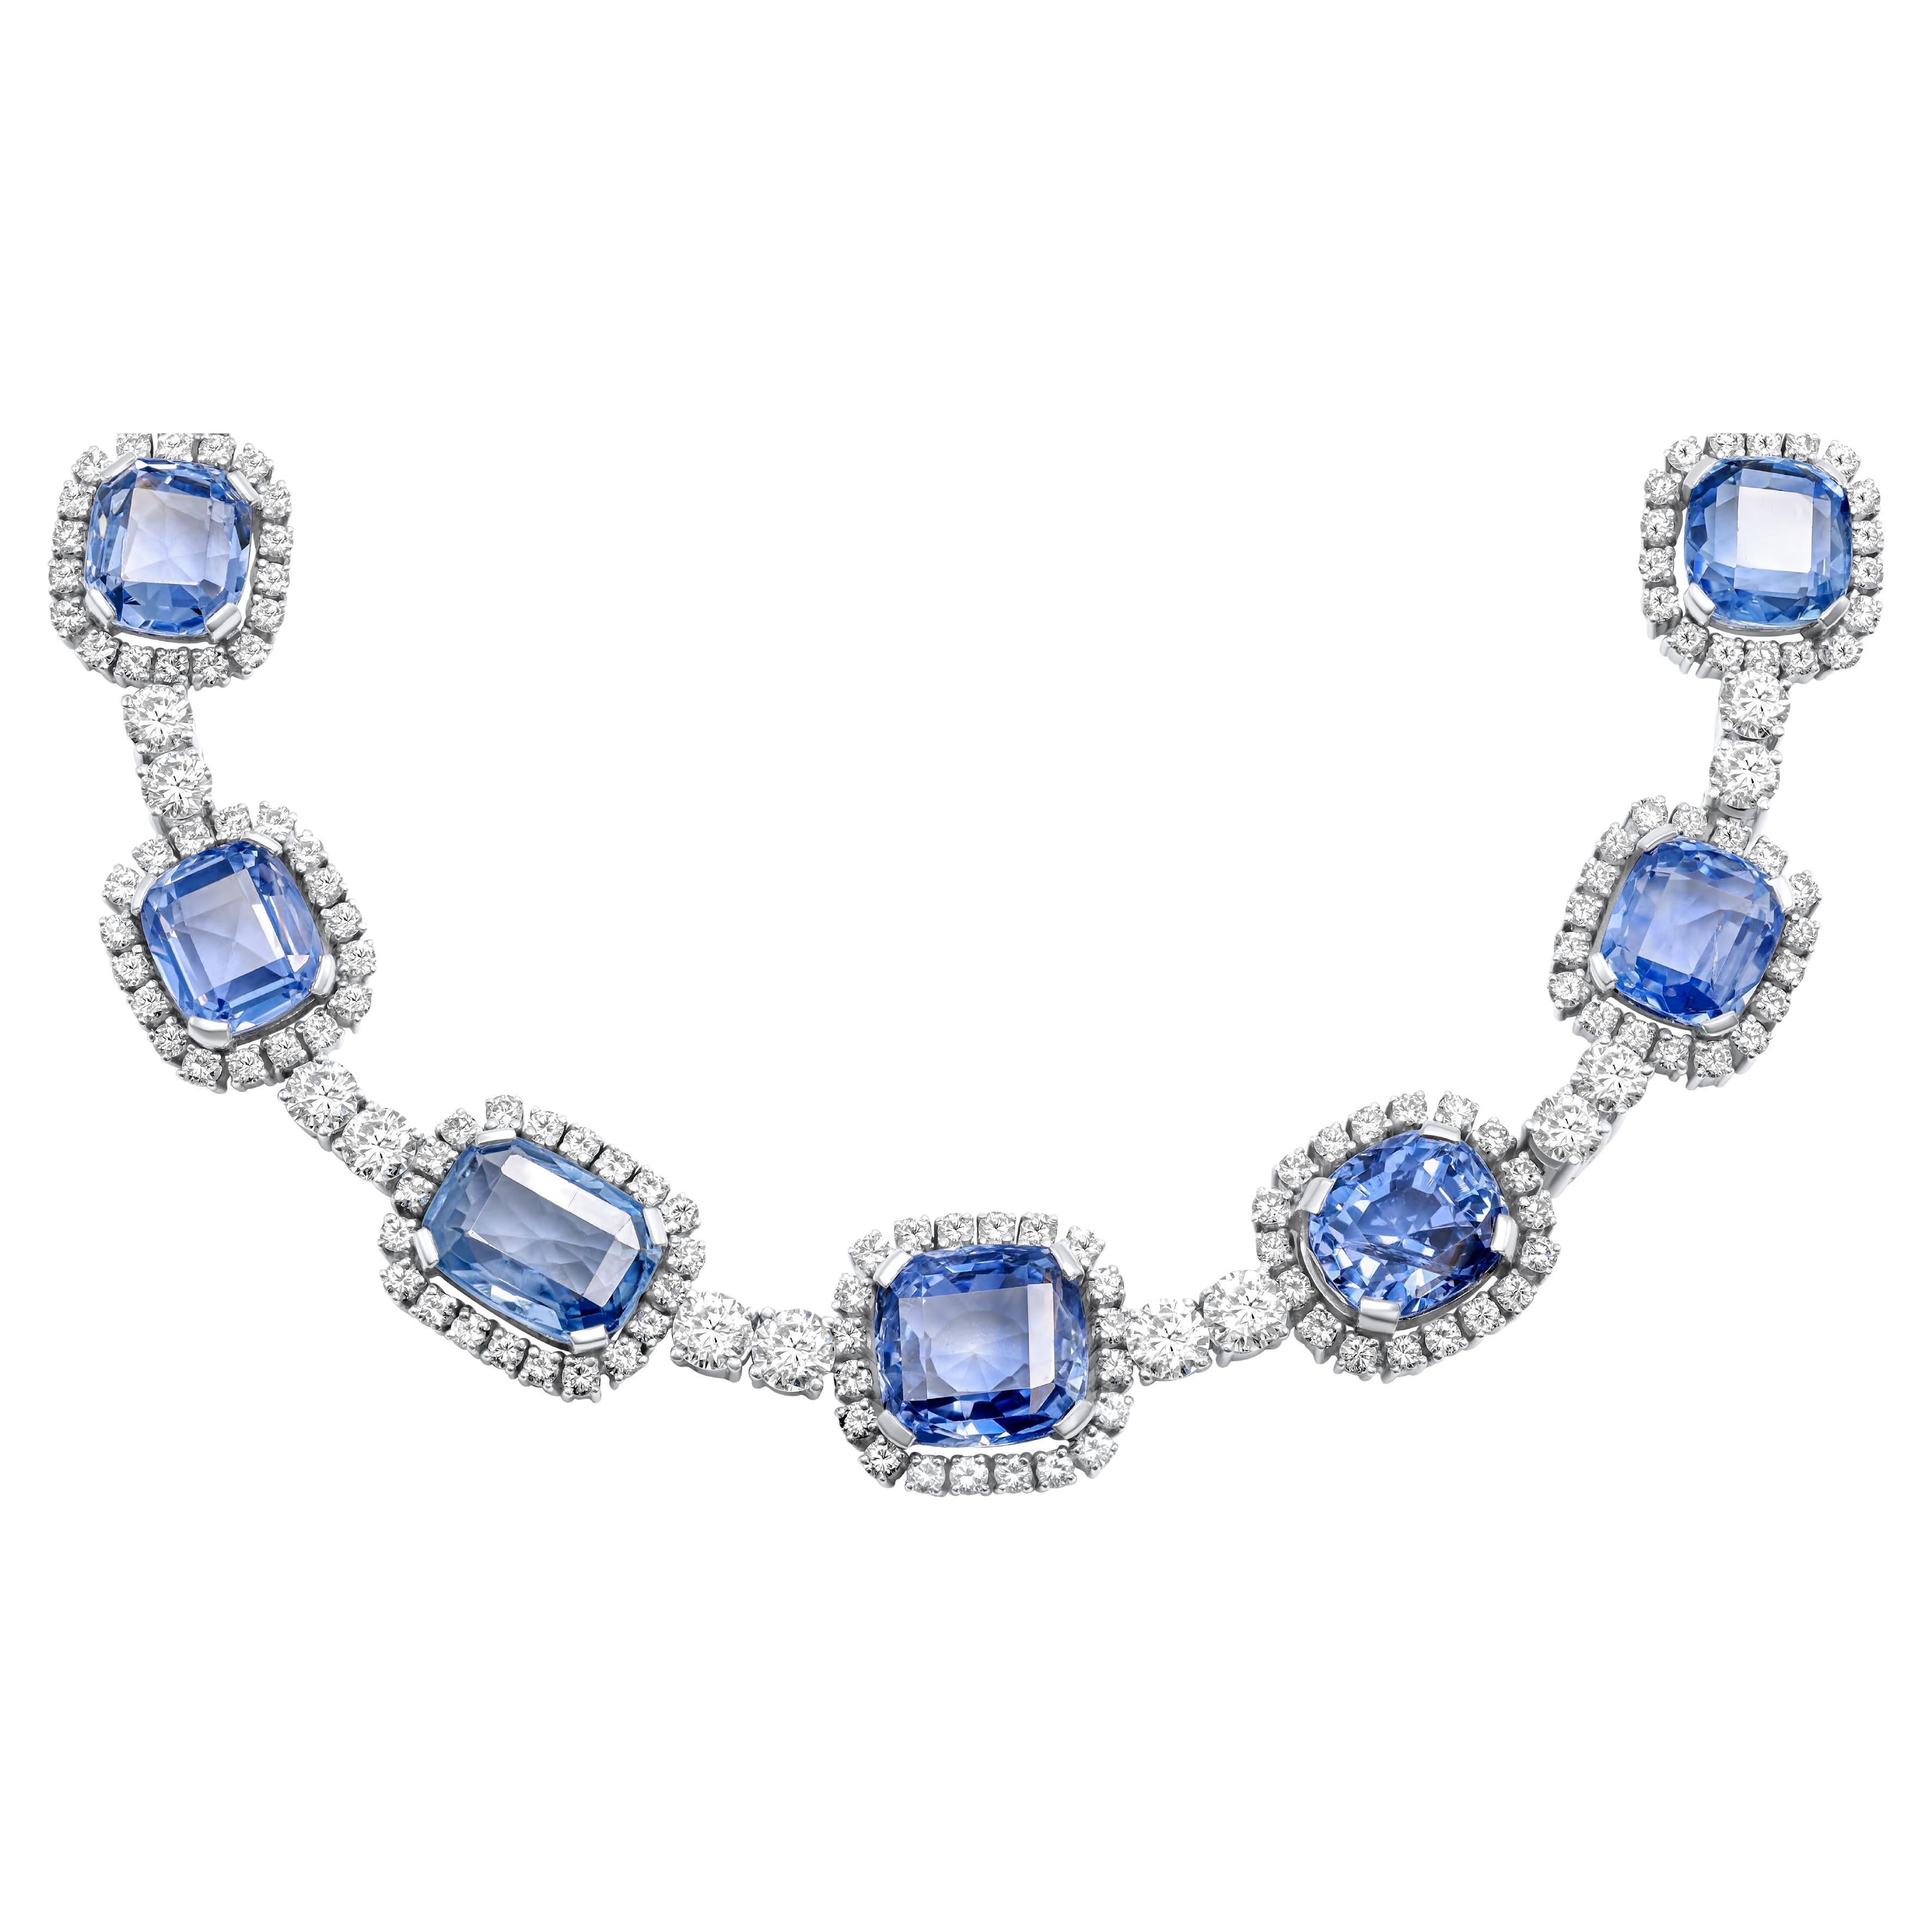 18kt diamond and sapphire necklace. This Necklace Contains 96.47 cts cushion cut no heat sapphire and 25.00 cts of diamonds around, certified global gems#032768